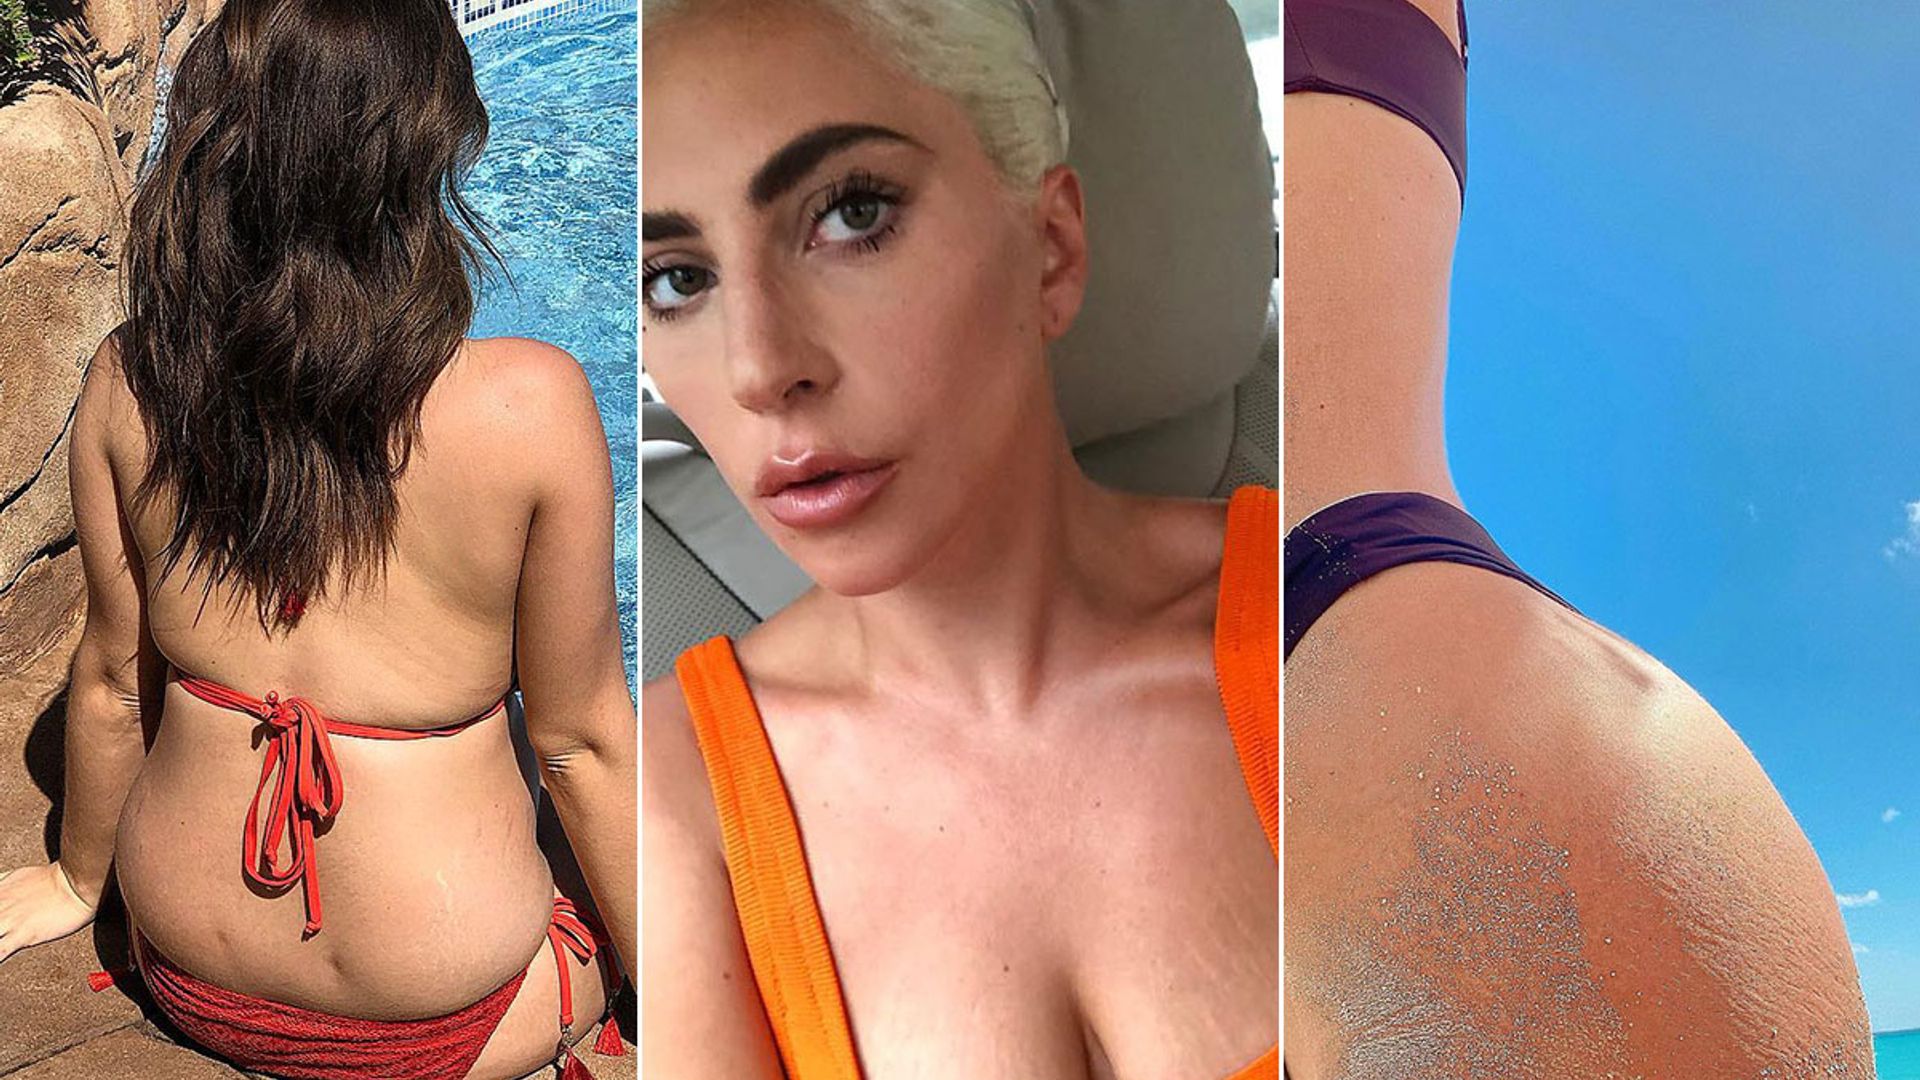 13 celebs embracing their stretch marks: photos of Stacey Solomon, Chrissy Teigen, Kylie Jenner, more